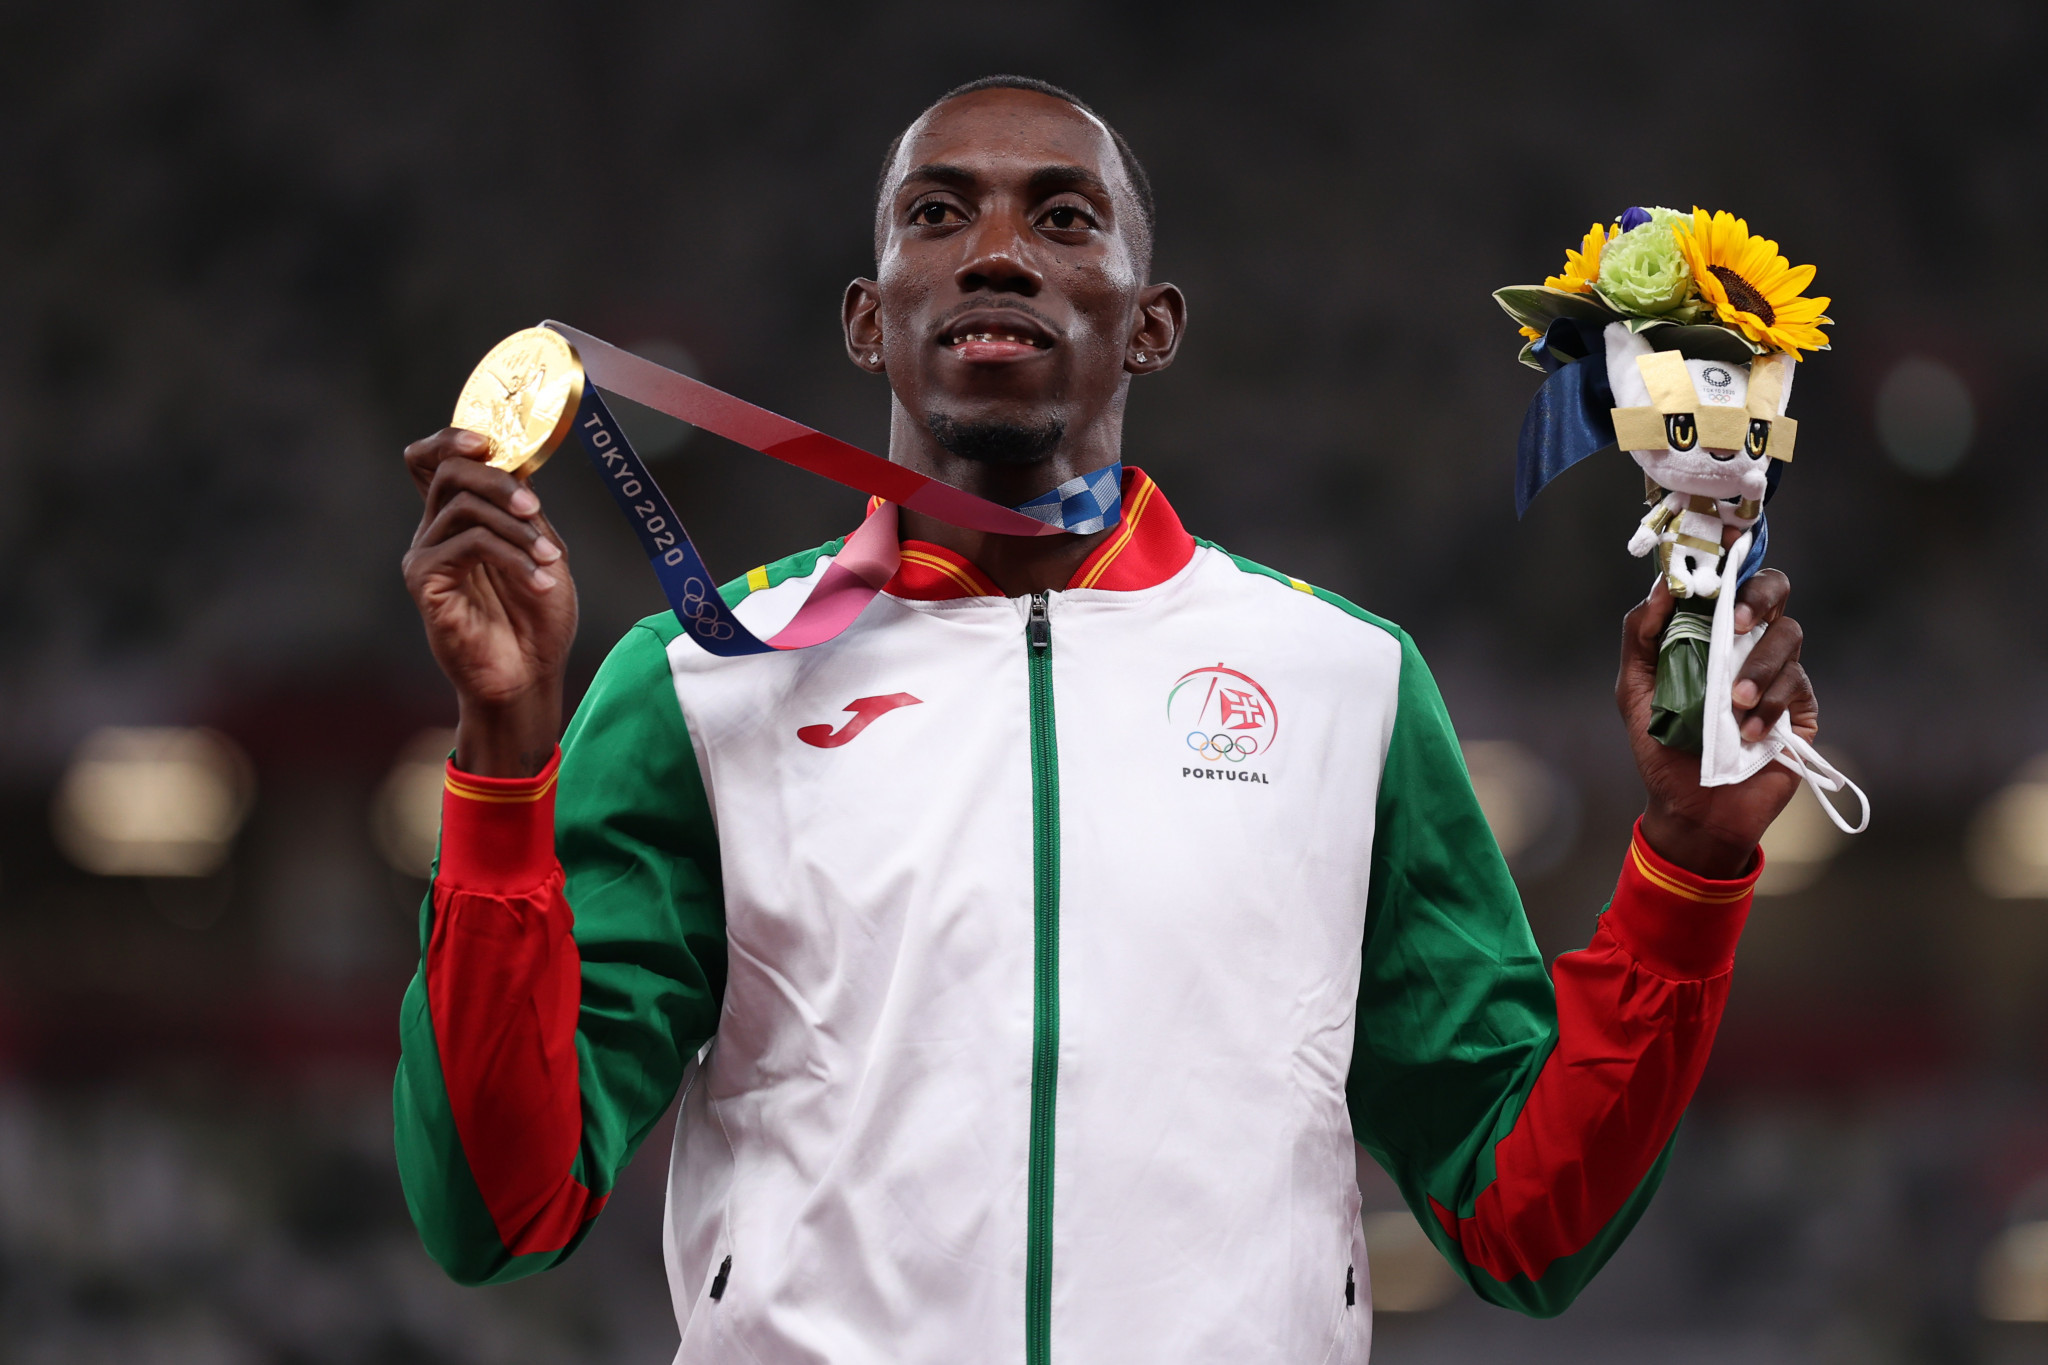 Pedro Pichardo was Portugal's only gold medallist at the Tokyo 2020 Olympics ©Getty Images